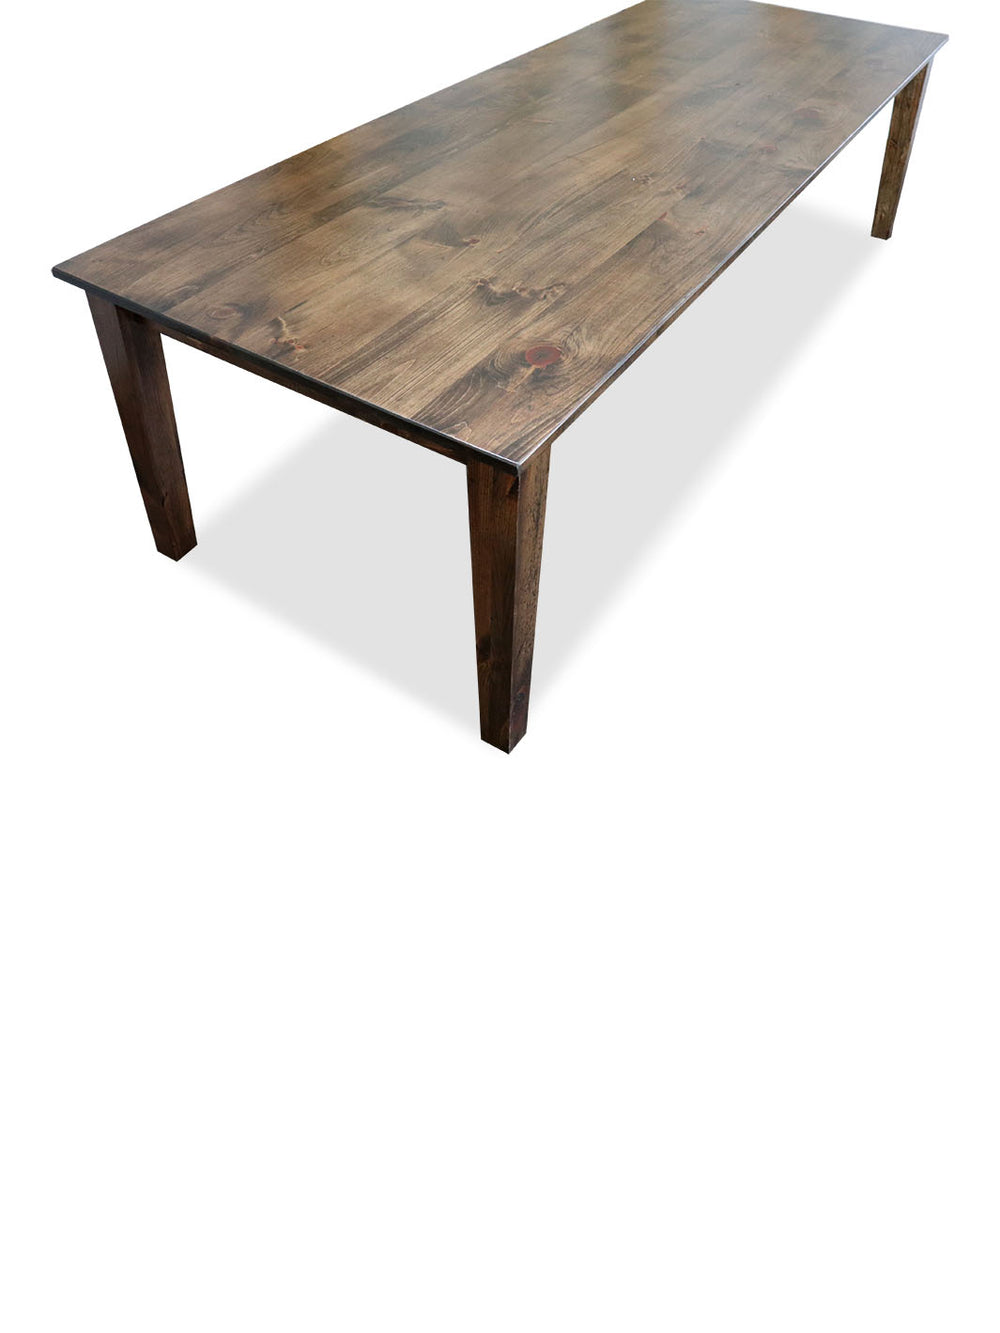 Pine Solid Wood Stained Modern Shaker Dining Table Earthly Comfort Dining Tables 1982-1